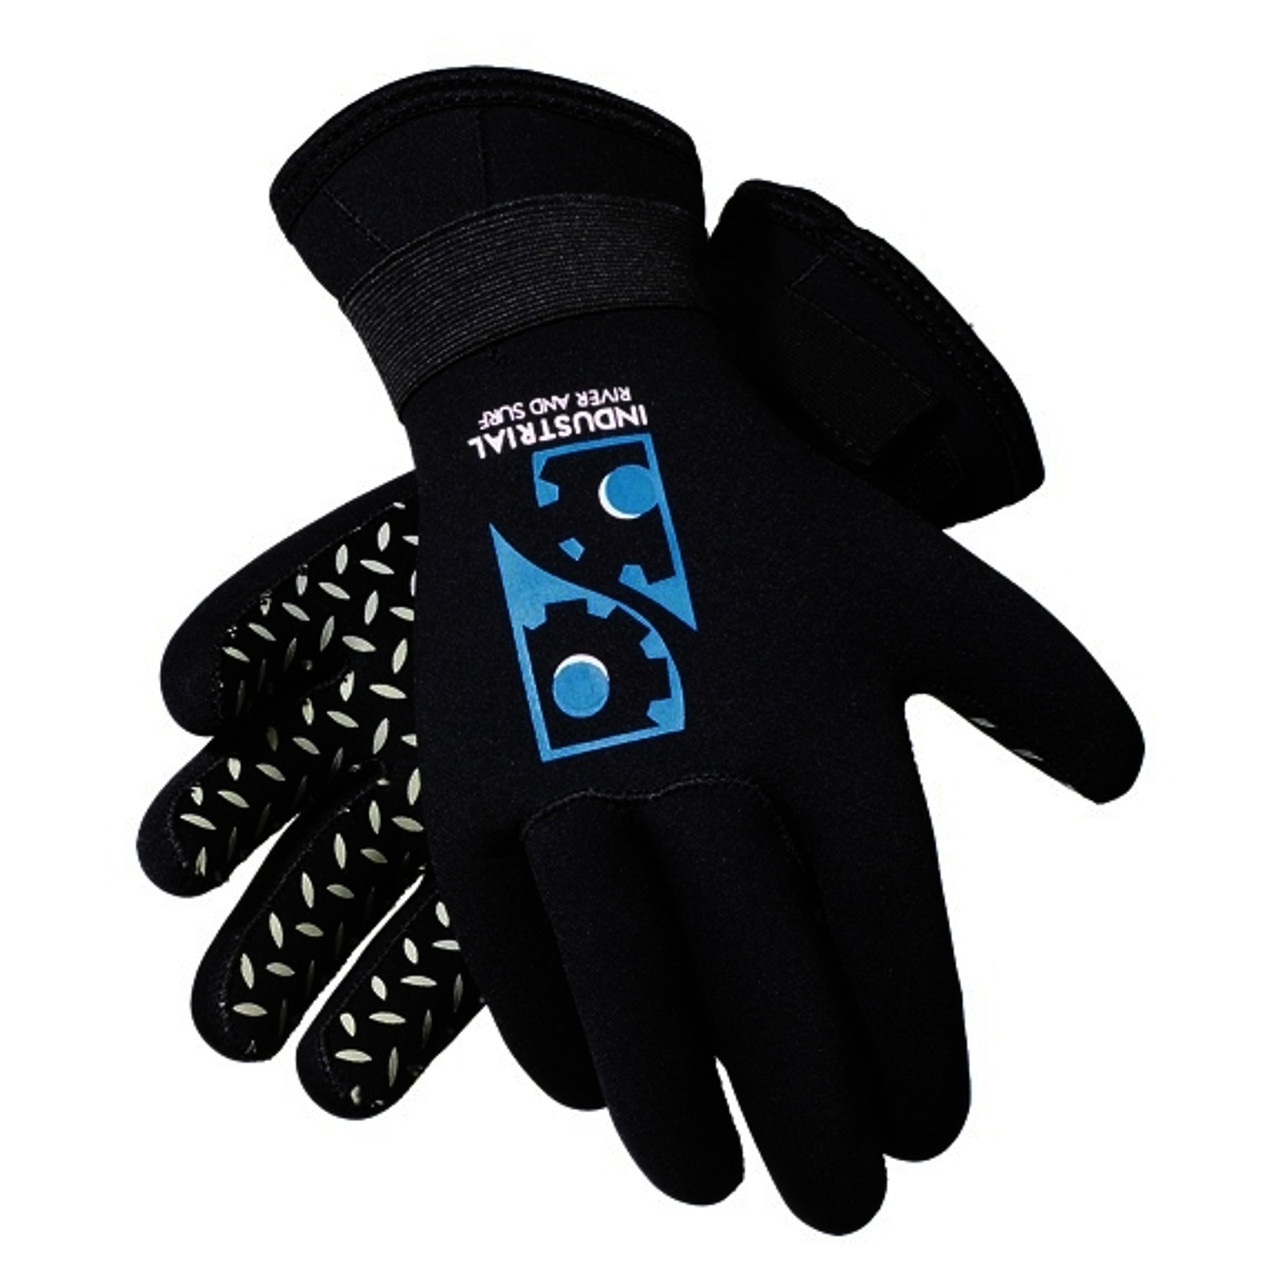 IR Neoprene Paddling Gloves from Immersion Research